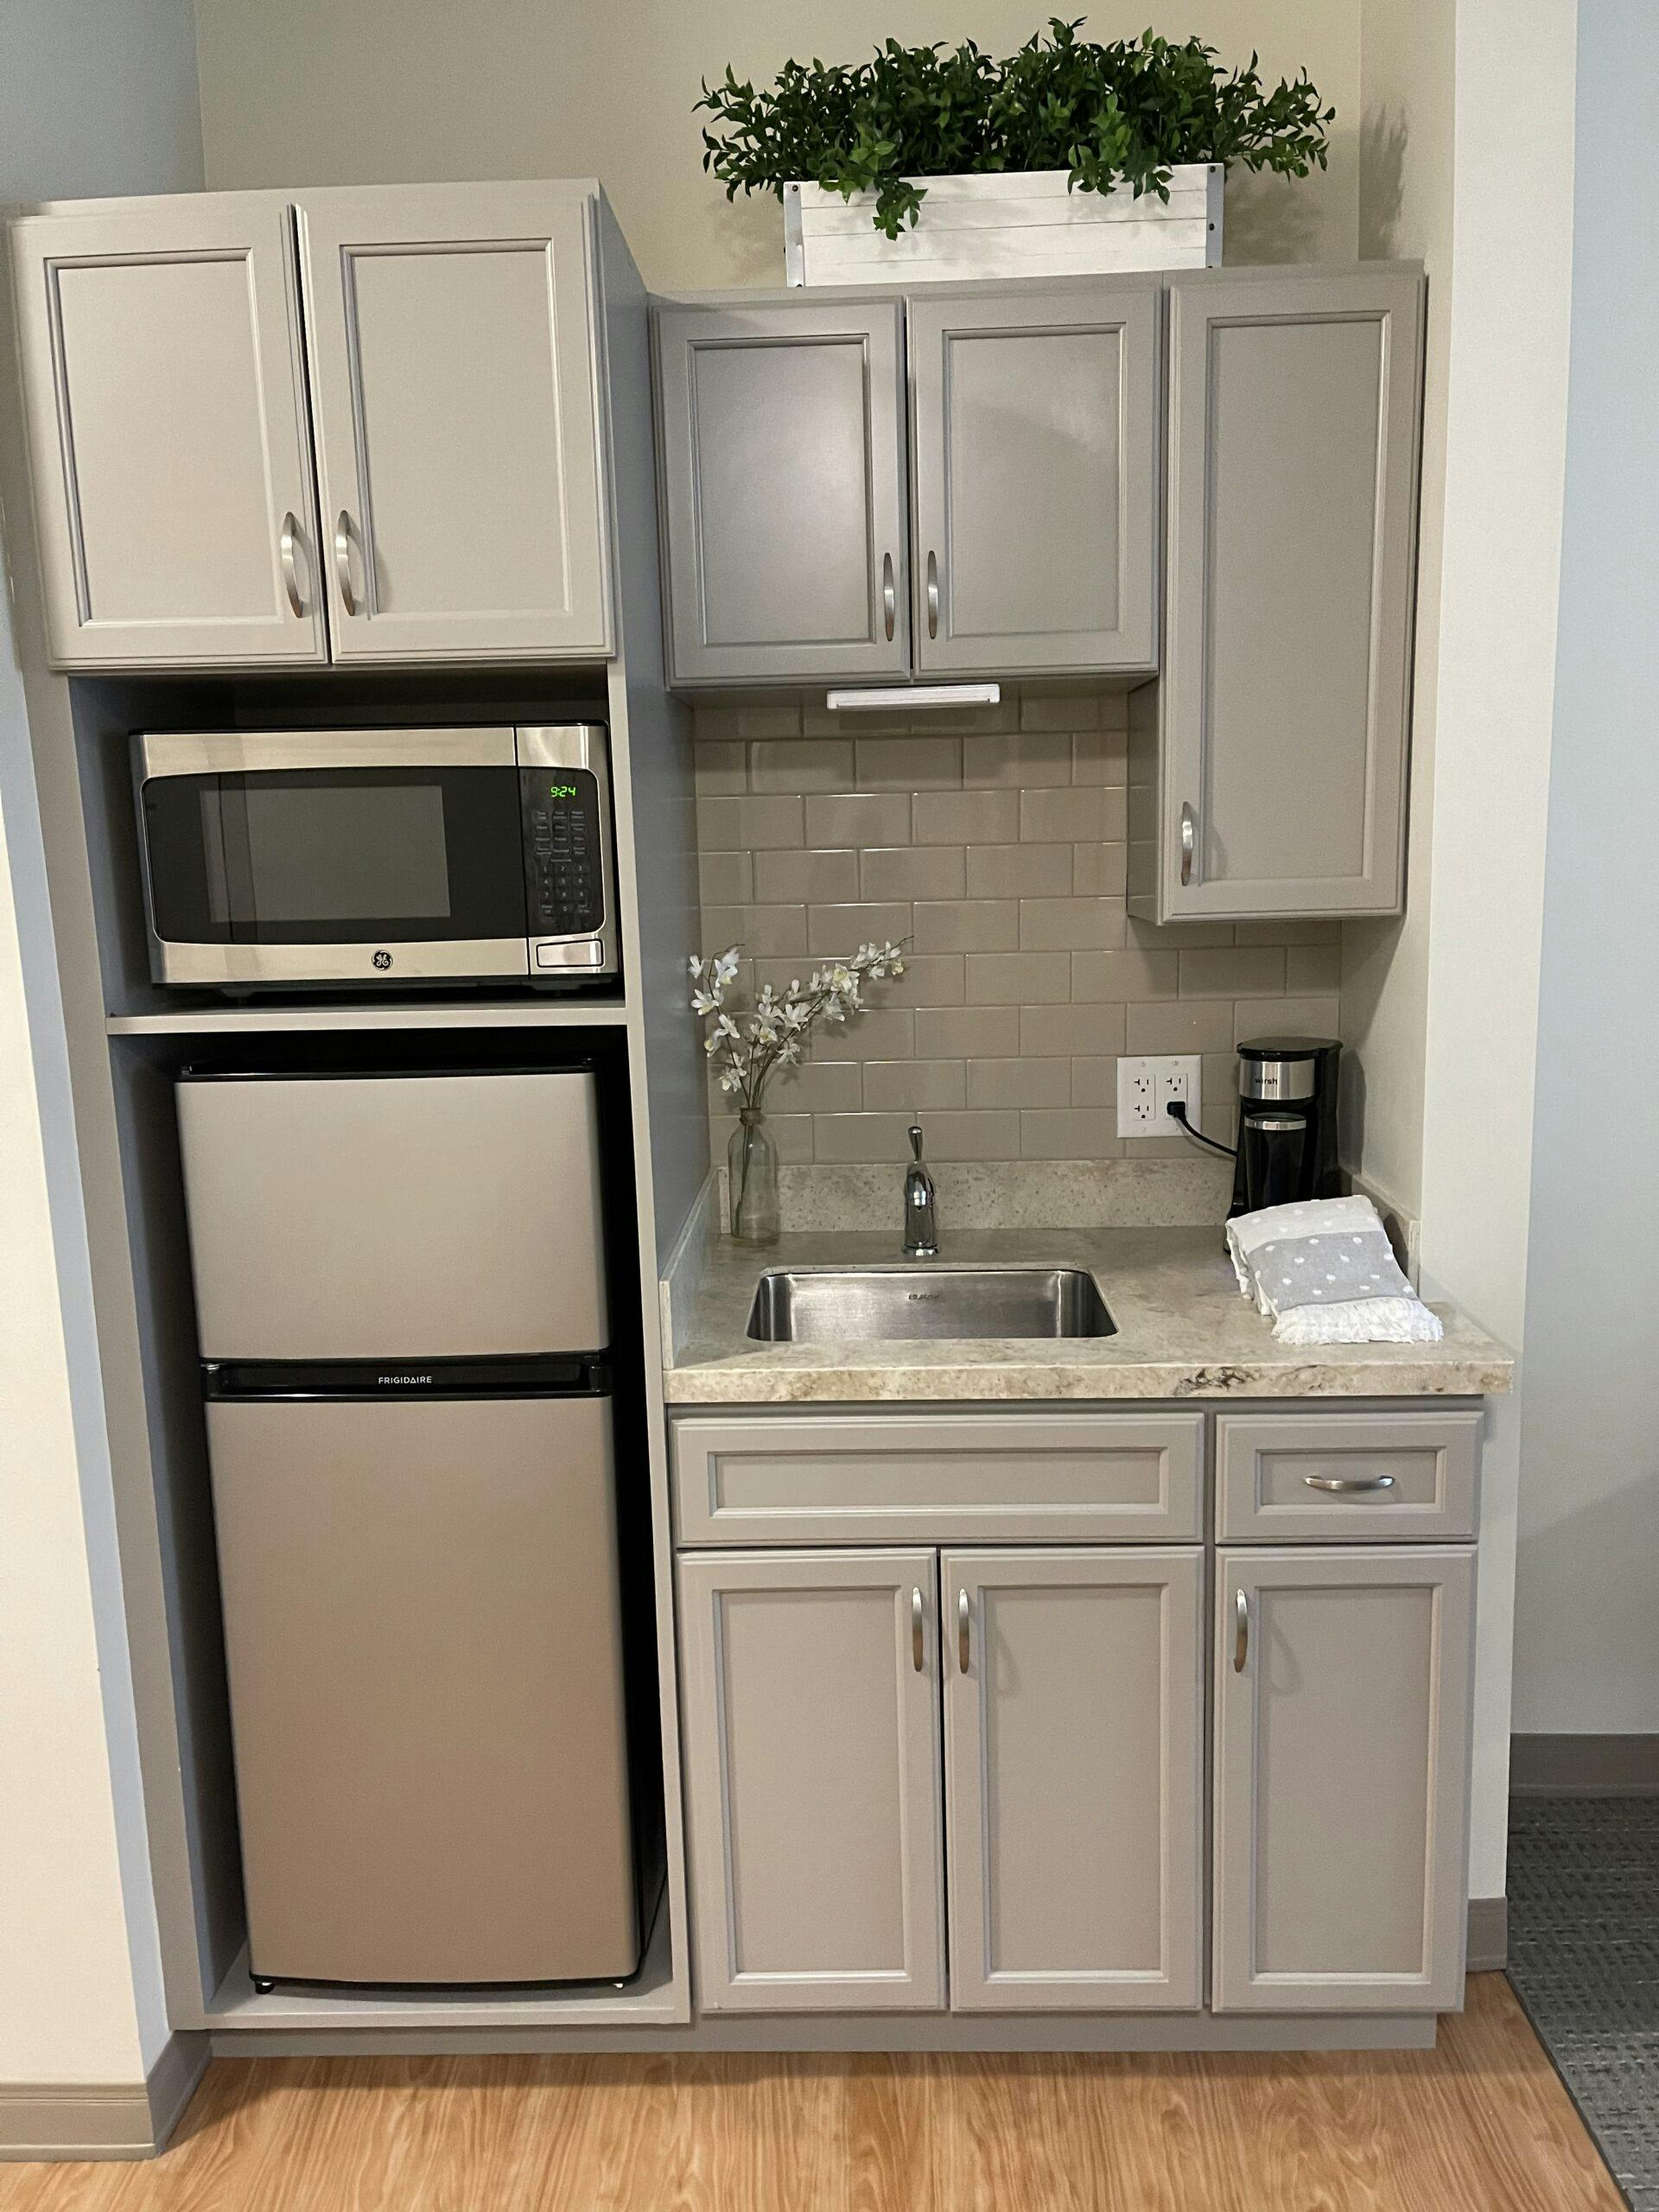 An assisted living kitchenette with a microwave and refrigerator.